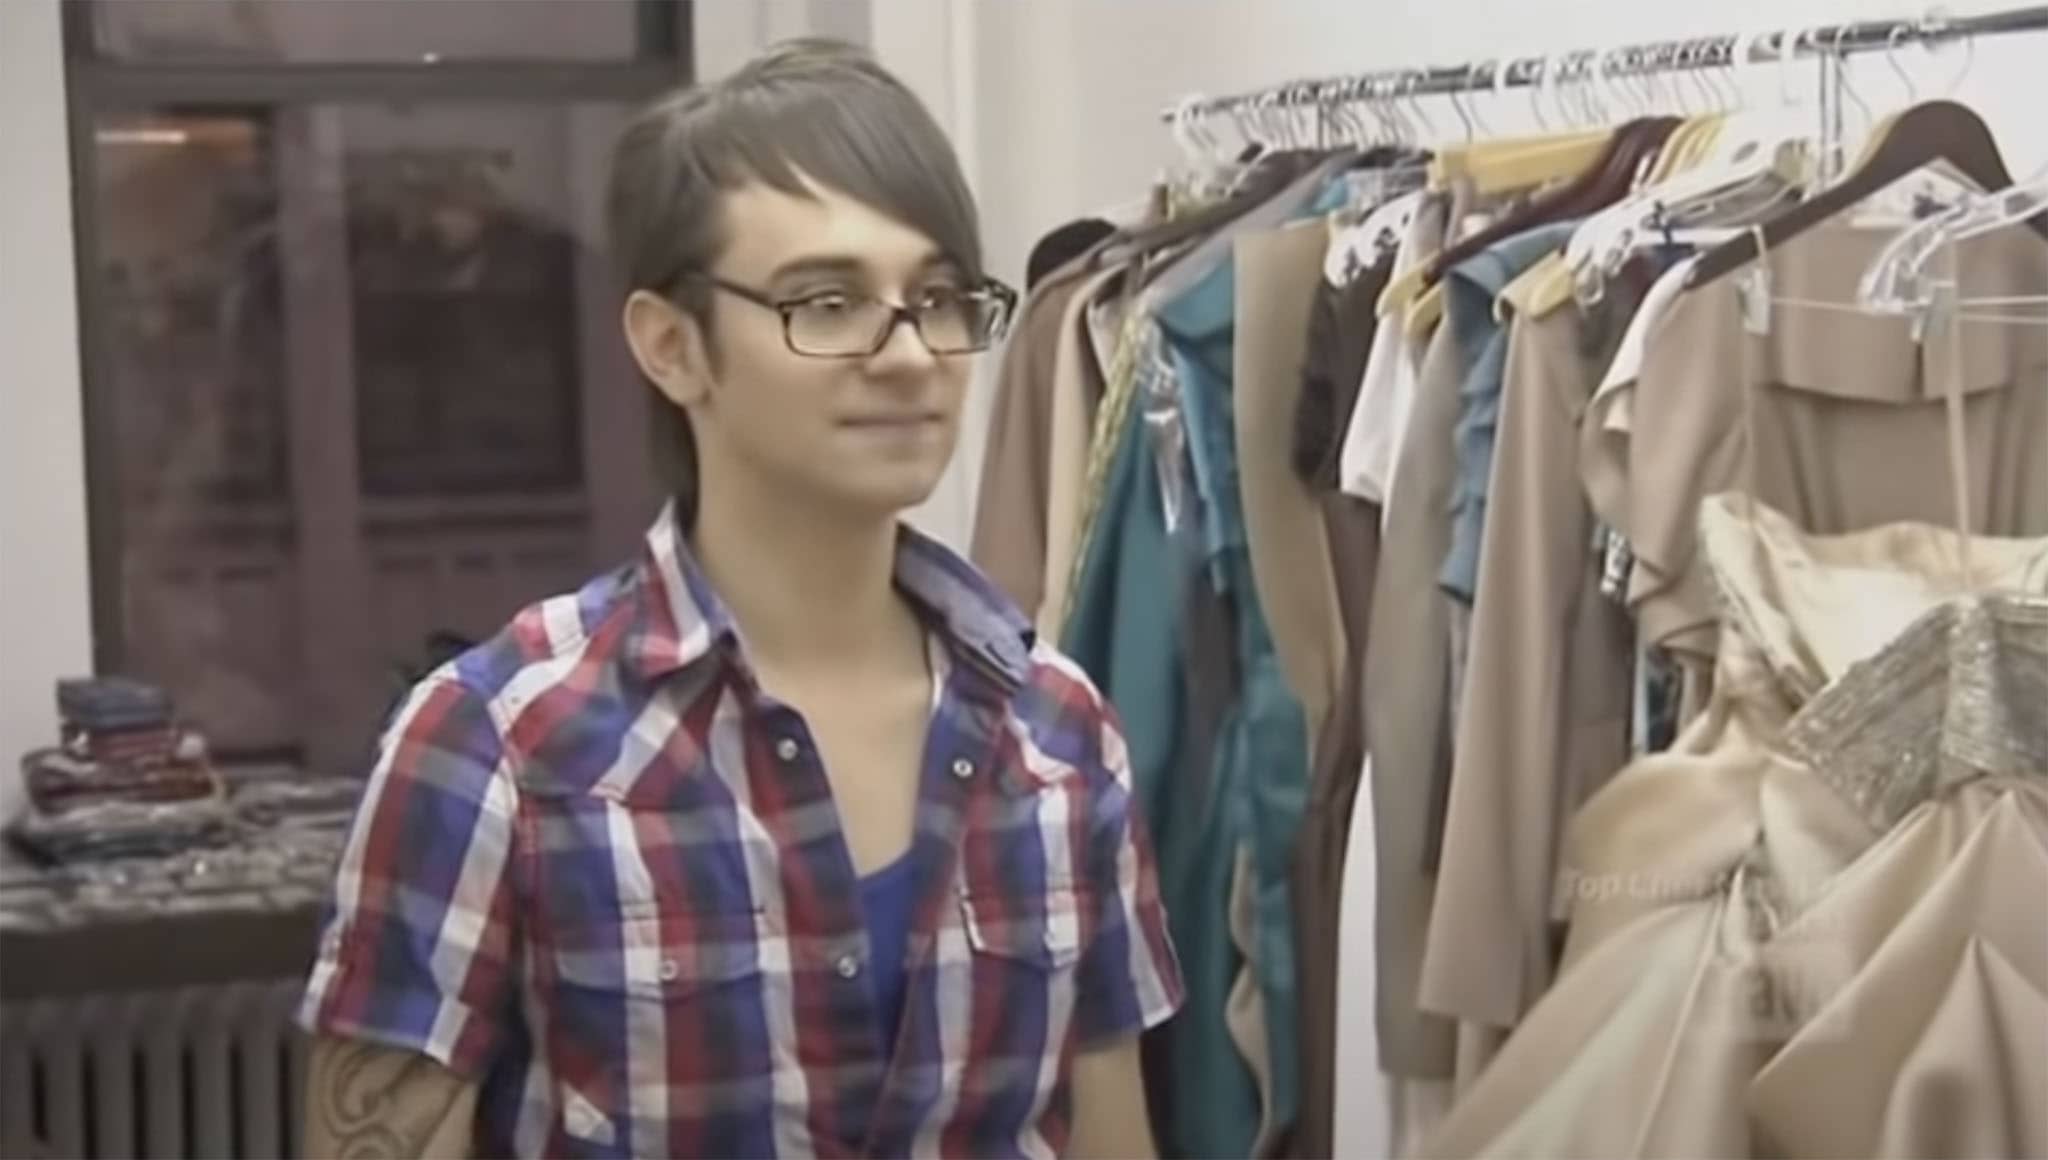 Christian Siriano became the youngest winner of Project Runway when he won the fourth season of the reality TV series in 2008